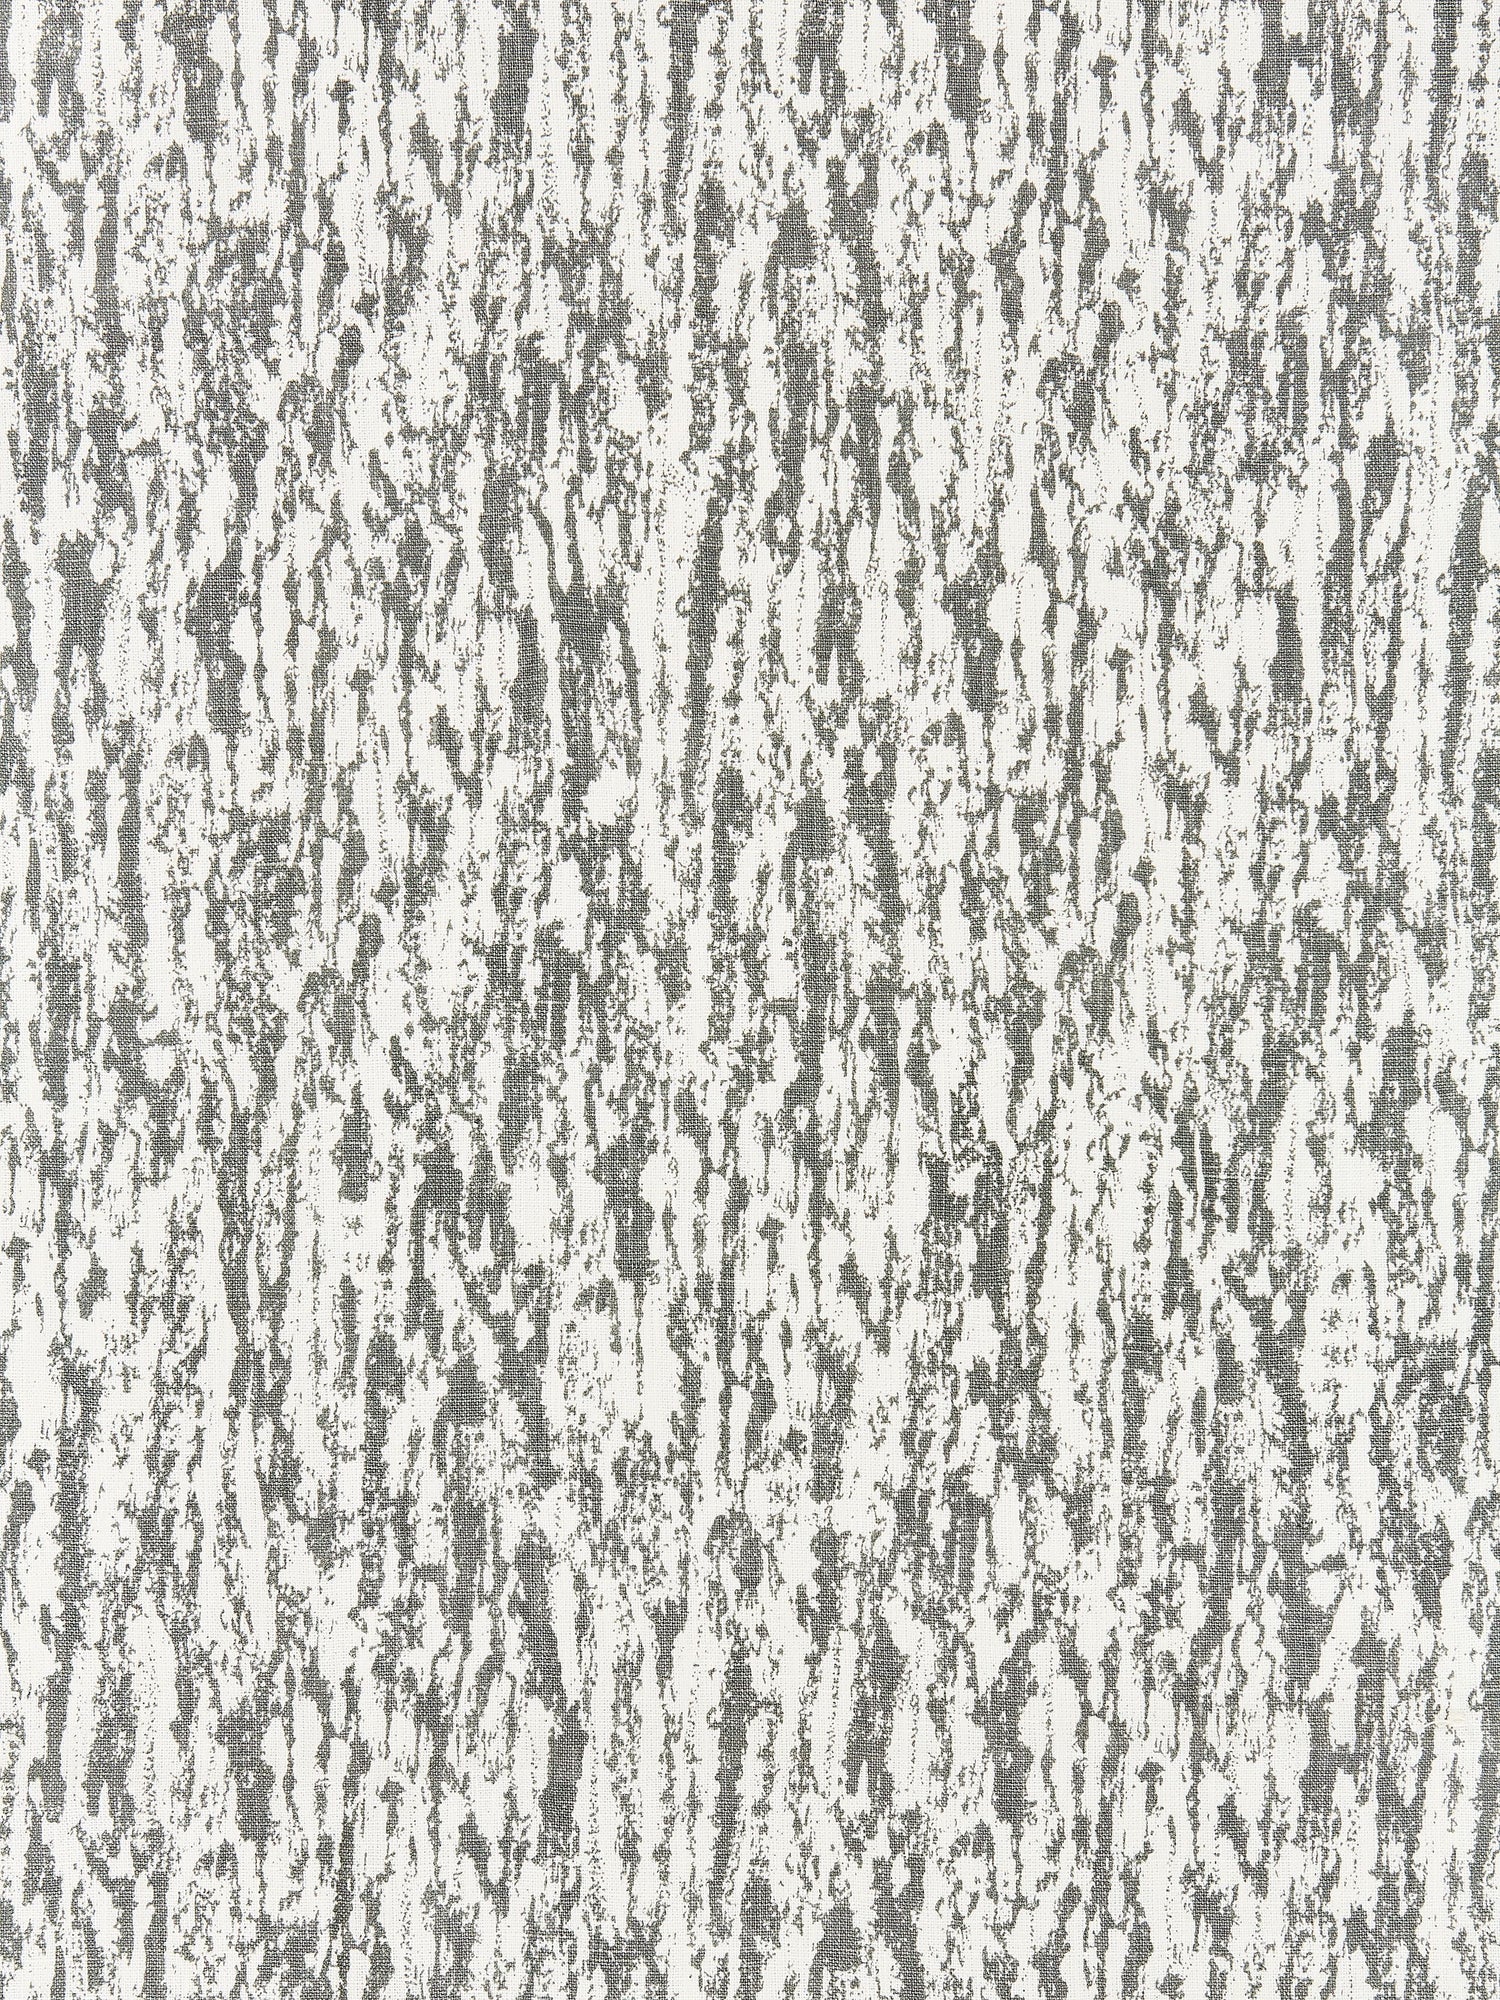 Sequoia Linen Print fabric in graphite color - pattern number SC 000416599 - by Scalamandre in the Scalamandre Fabrics Book 1 collection